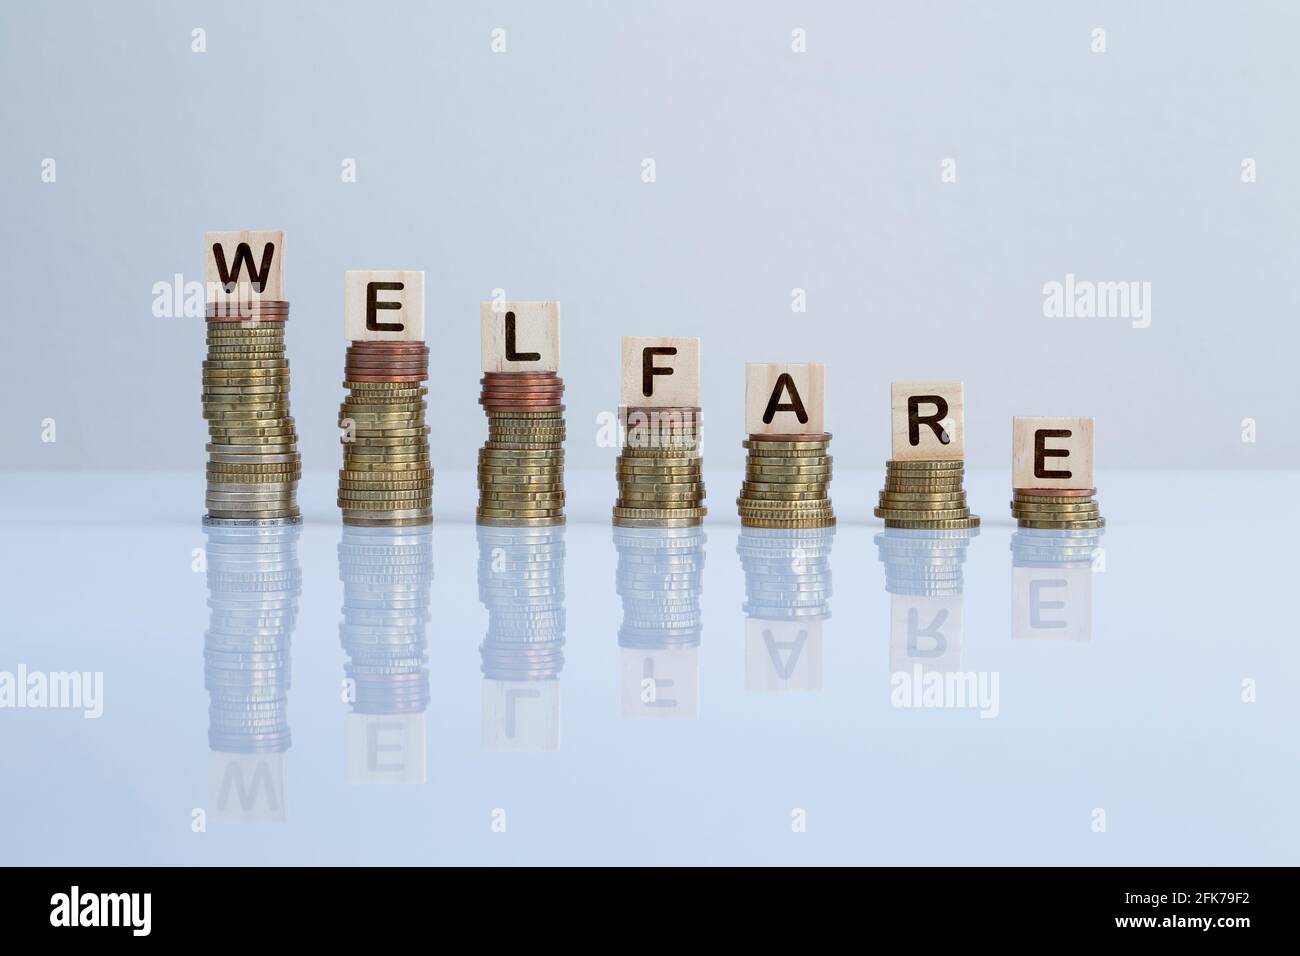 Word 'WELFARE' on wooden blocks on top of descending stacks of coins on gray. Concept photo of welfare, government support and social security. Stock Photo